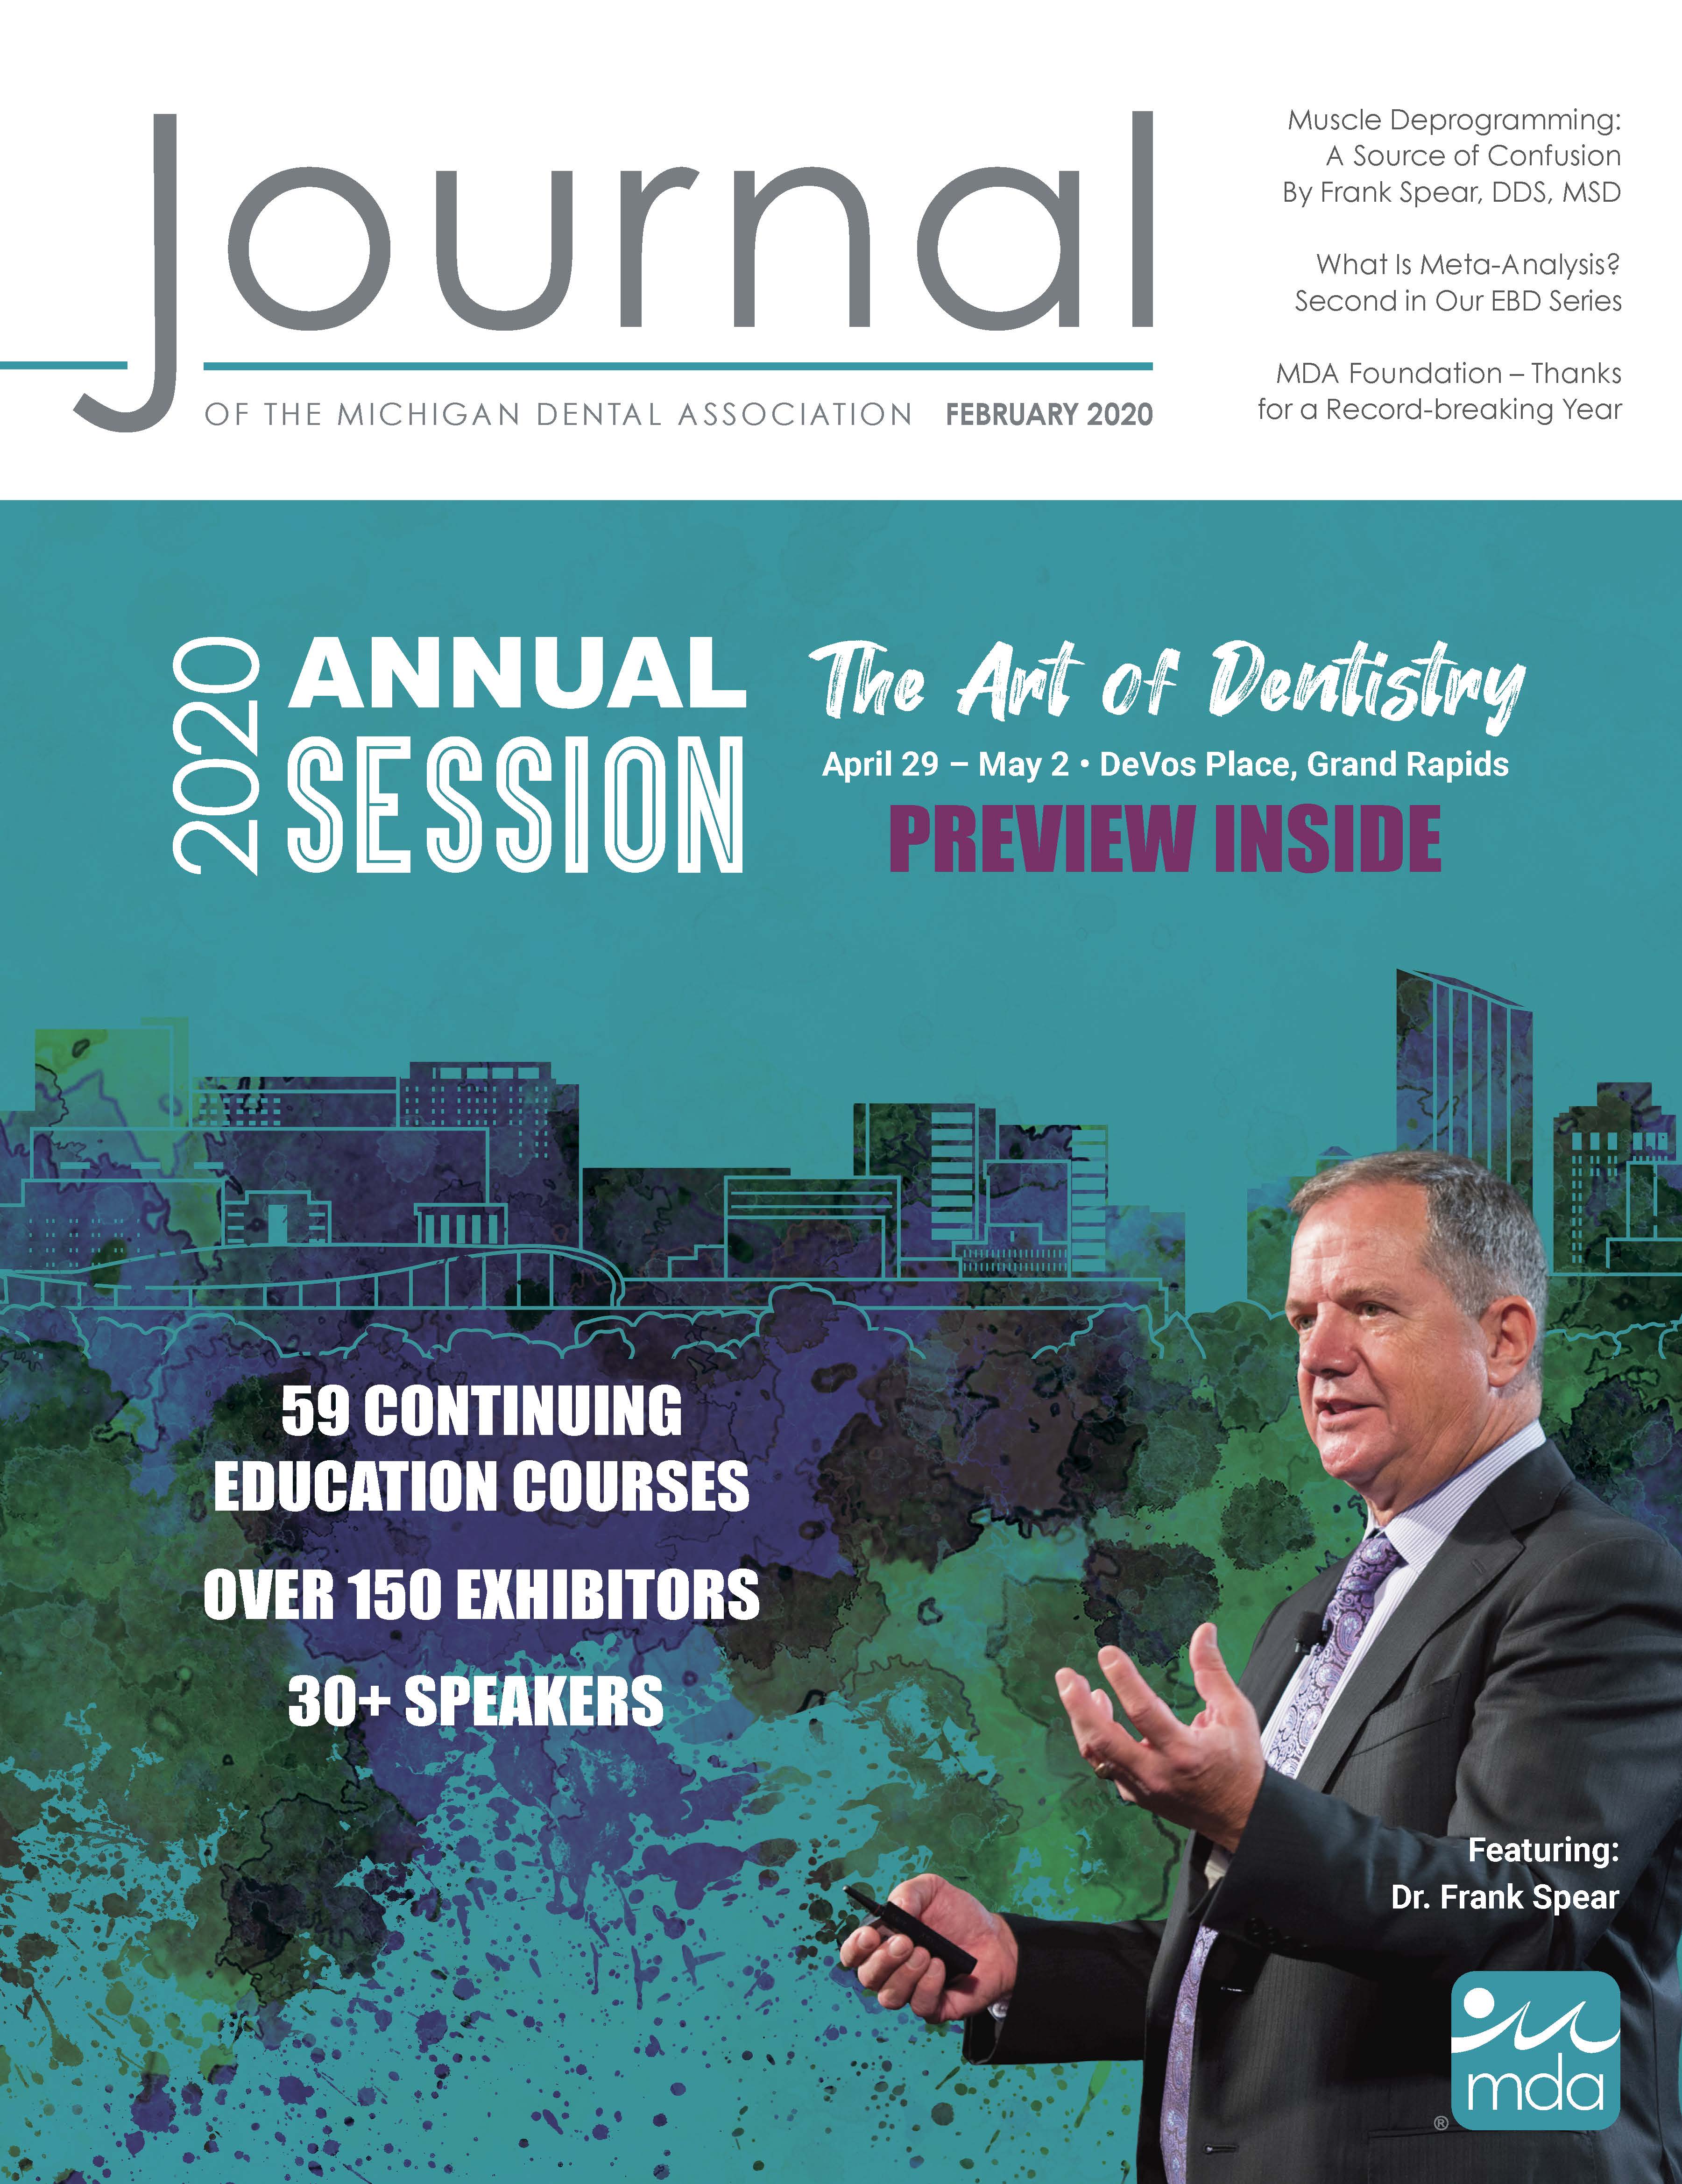 Cover of the Journal of the Michigan Dental Association with Dr. Frank Spear speaking with an illustrated city skyline background.